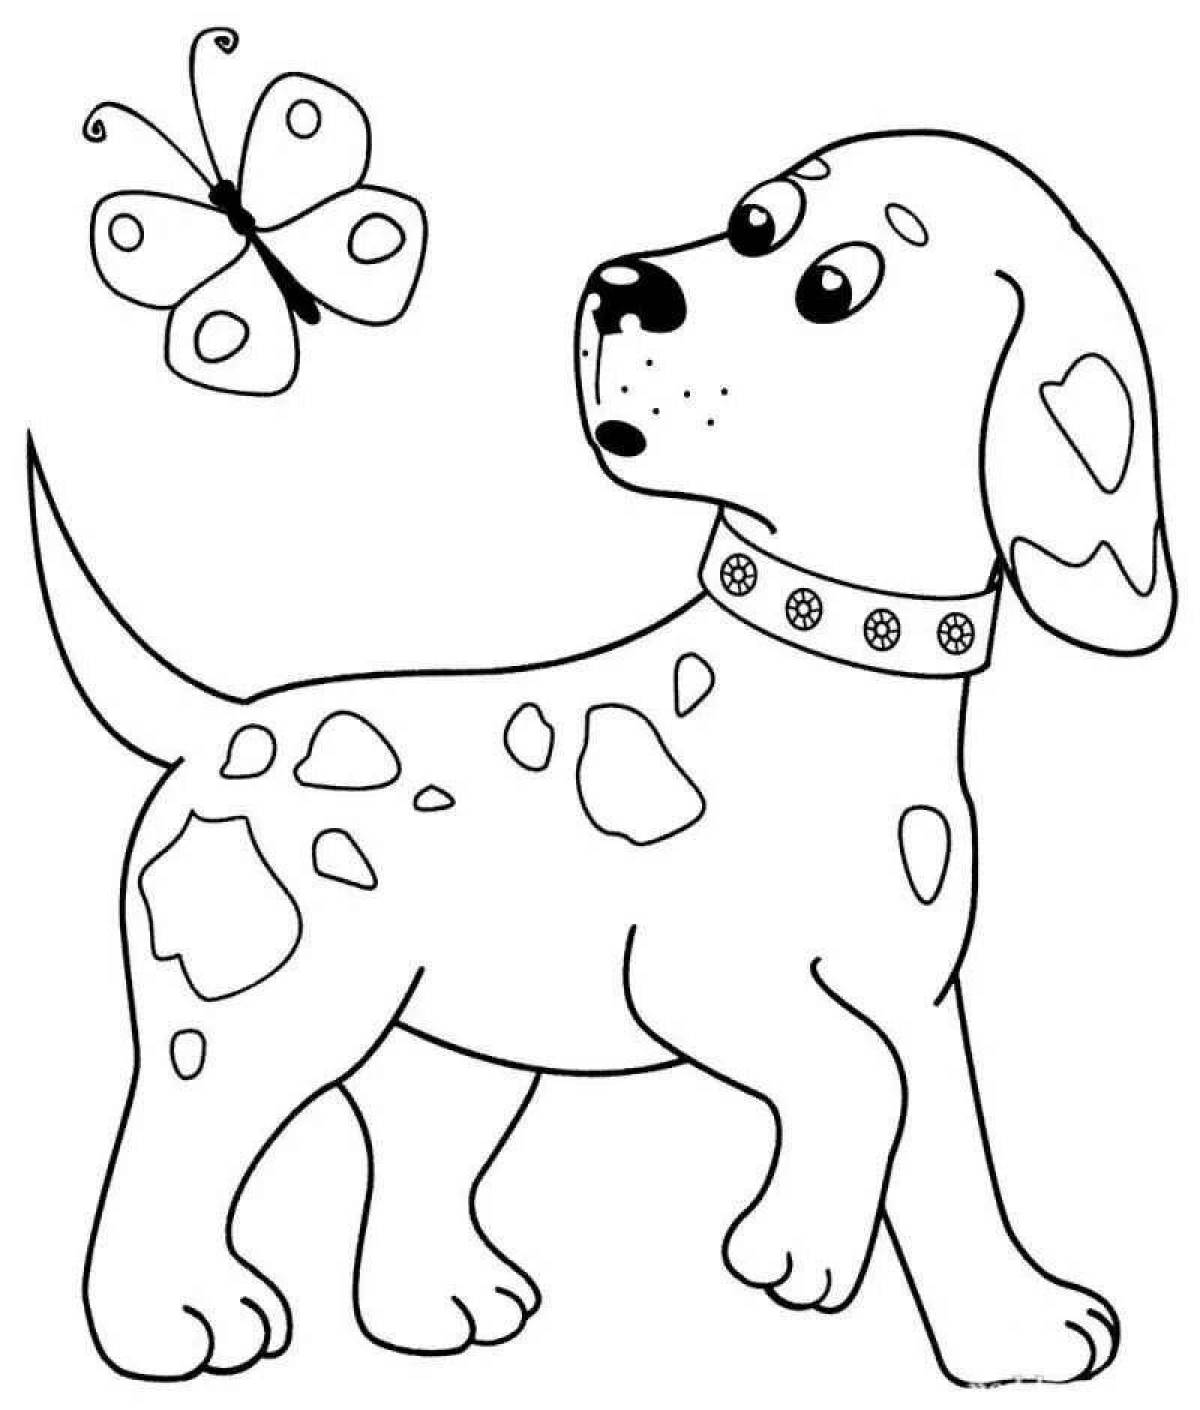 Majestic animal dog coloring pages